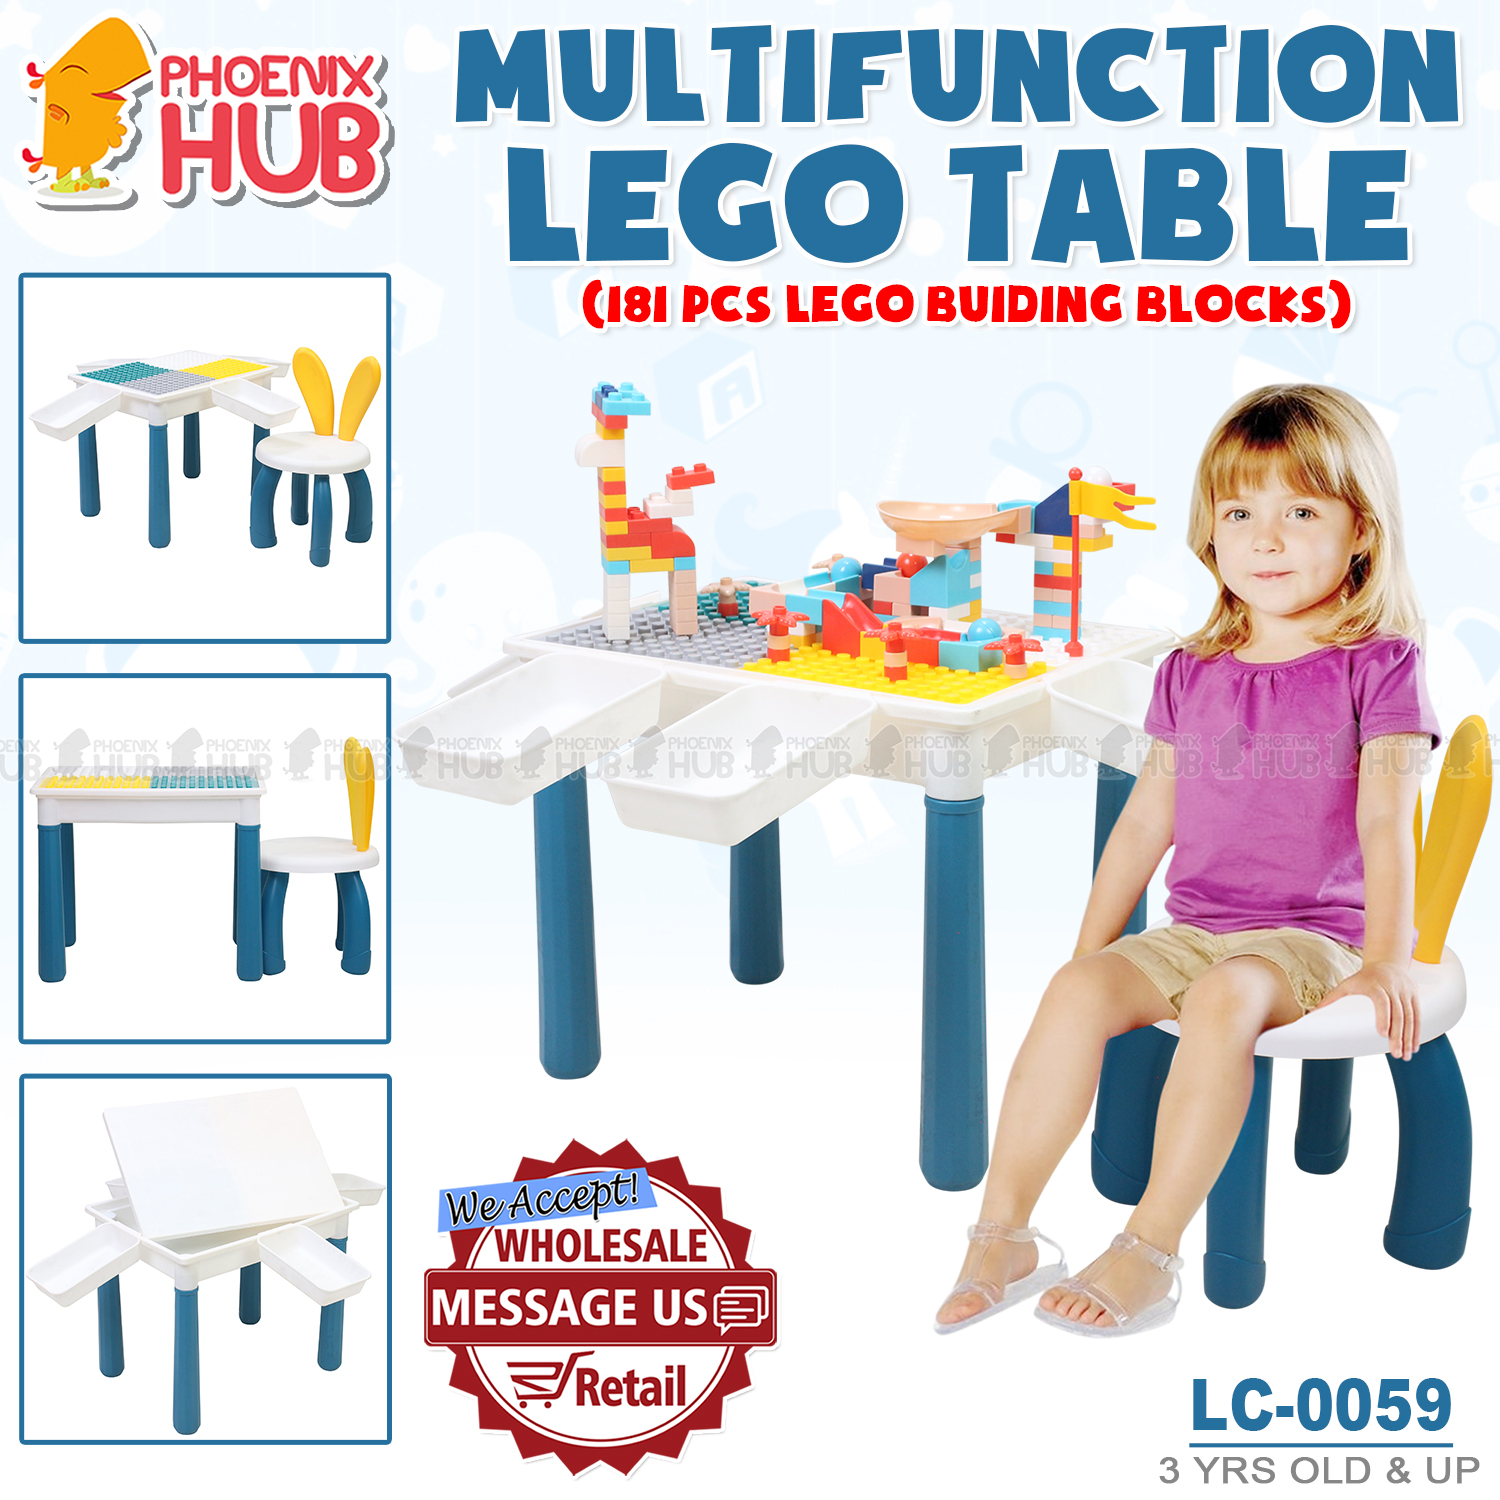 Room　Lazada　great　2023　Poster　discounts　and　Dec　online　prices　Philippines　Kid　Lego　Shop　with